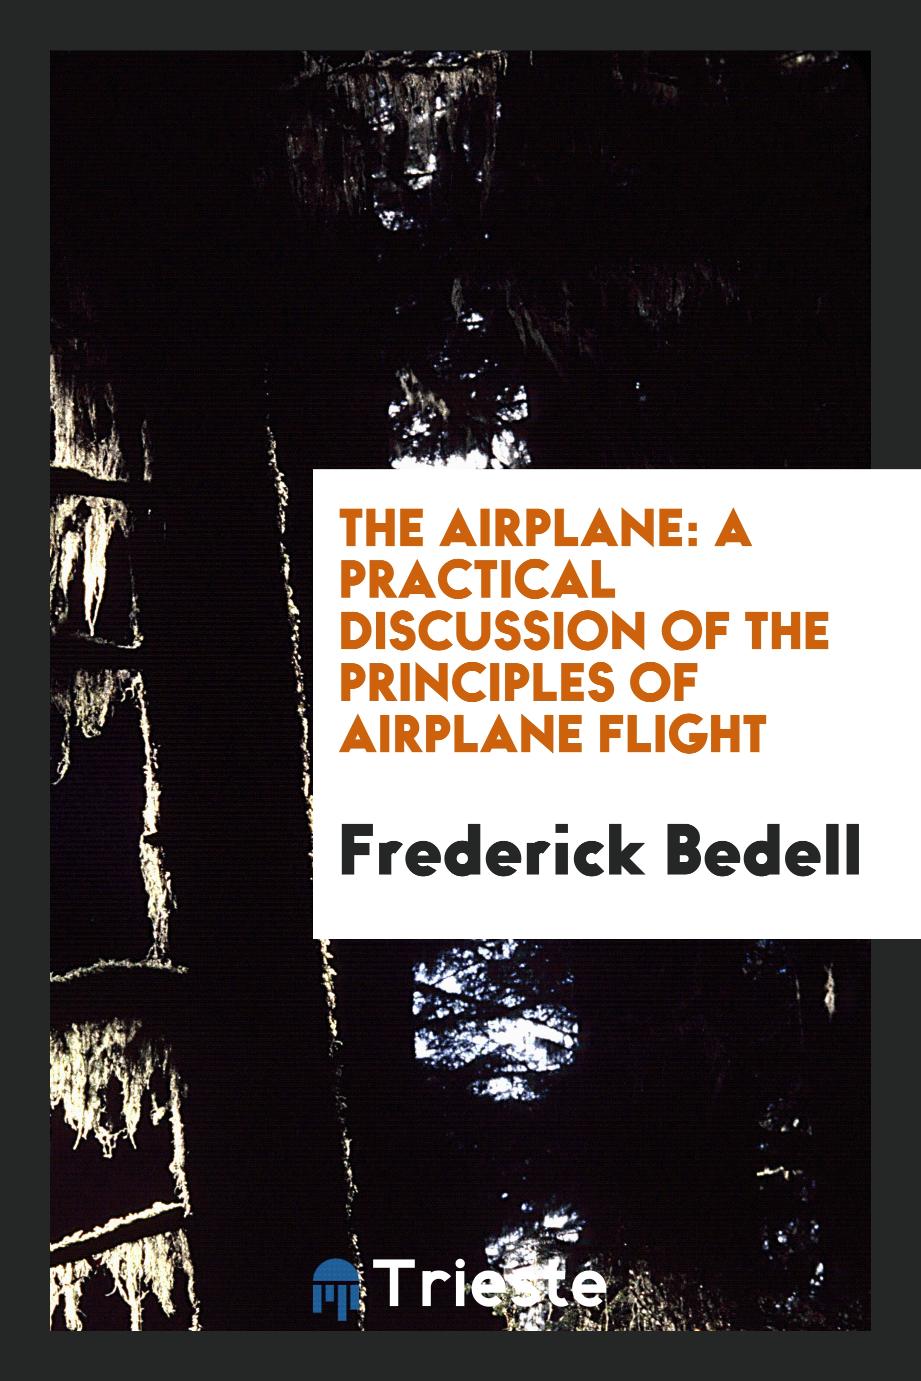 The Airplane: A Practical Discussion of the Principles of Airplane Flight